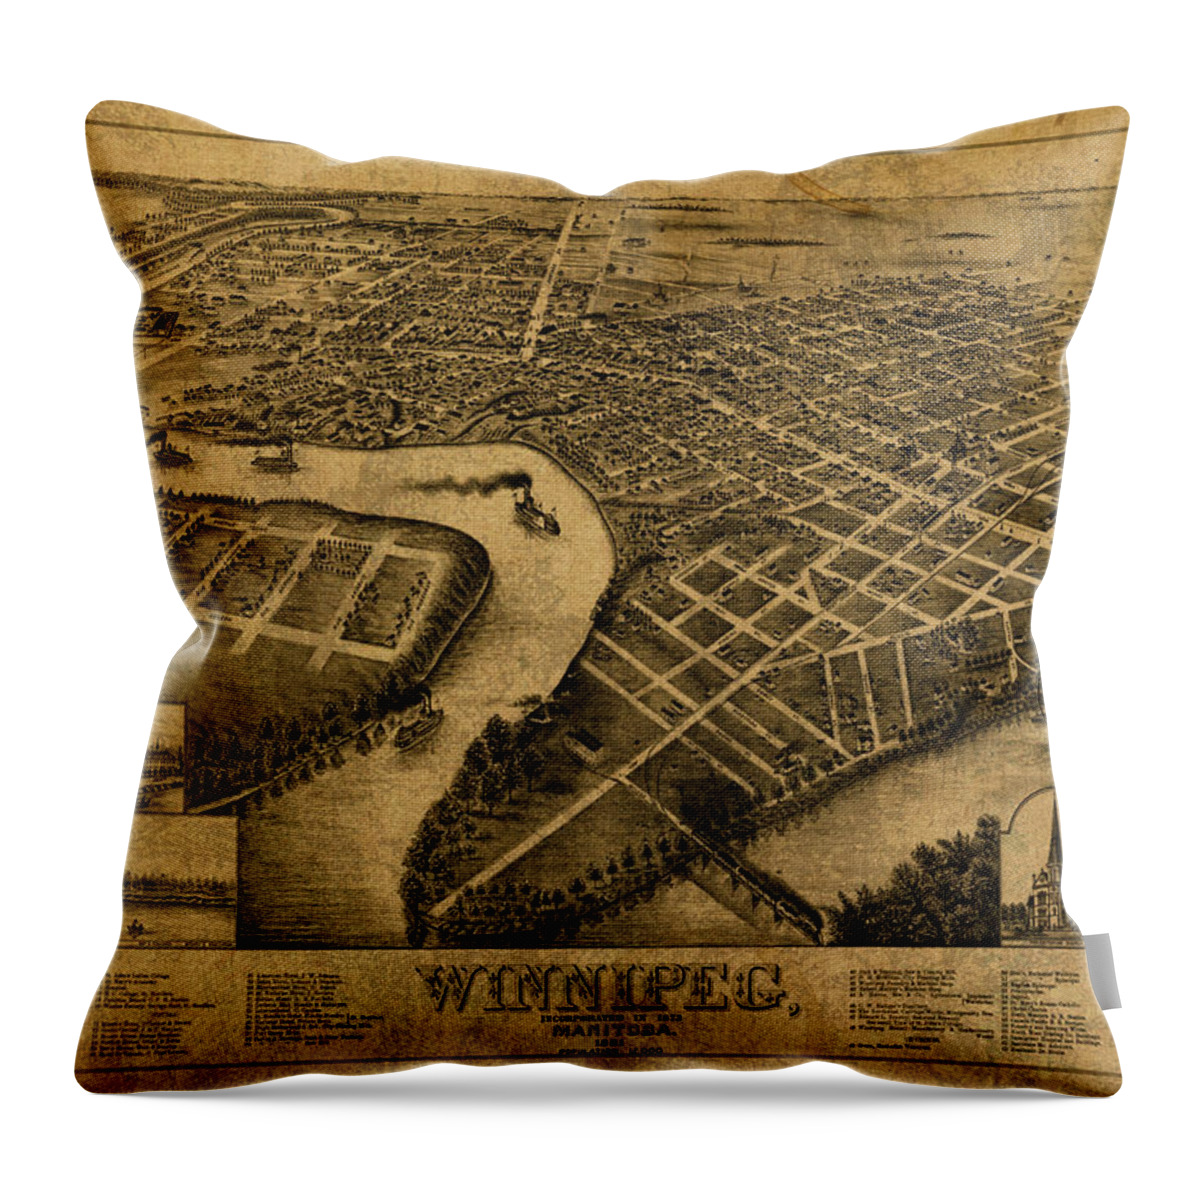 Vintage Throw Pillow featuring the mixed media Vintage Map of Winnipeg Canada 1881 by Design Turnpike